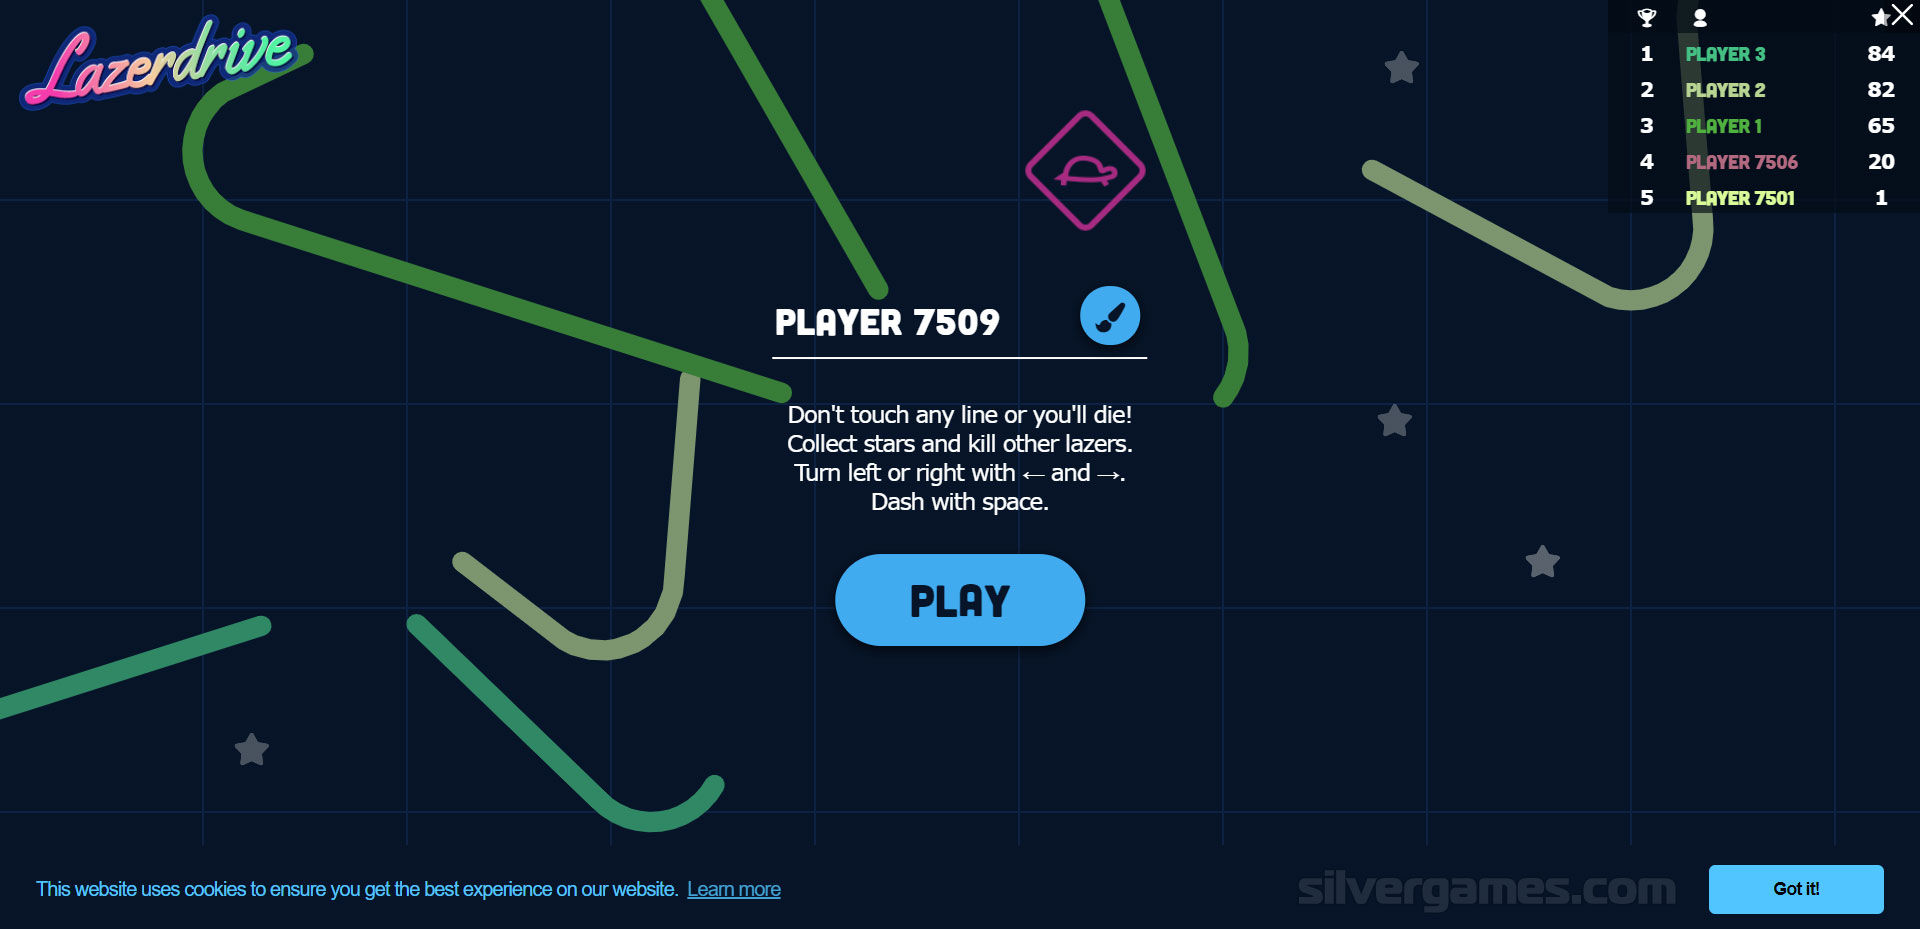 Paper.io 2 - Play Online on SilverGames 🕹️